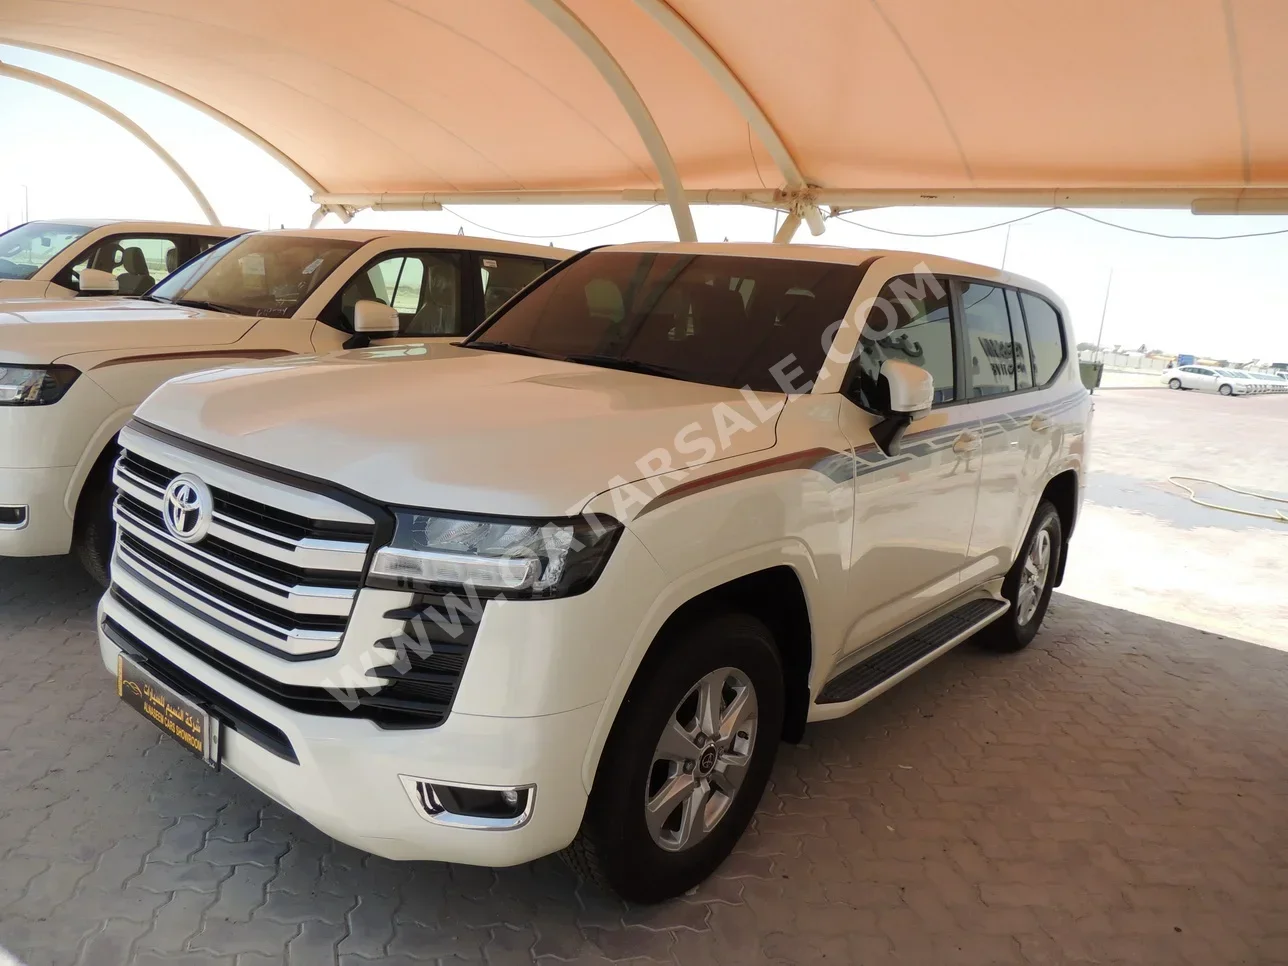 Toyota  Land Cruiser  GXR Twin Turbo  2023  Automatic  300 Km  6 Cylinder  Four Wheel Drive (4WD)  SUV  White  With Warranty